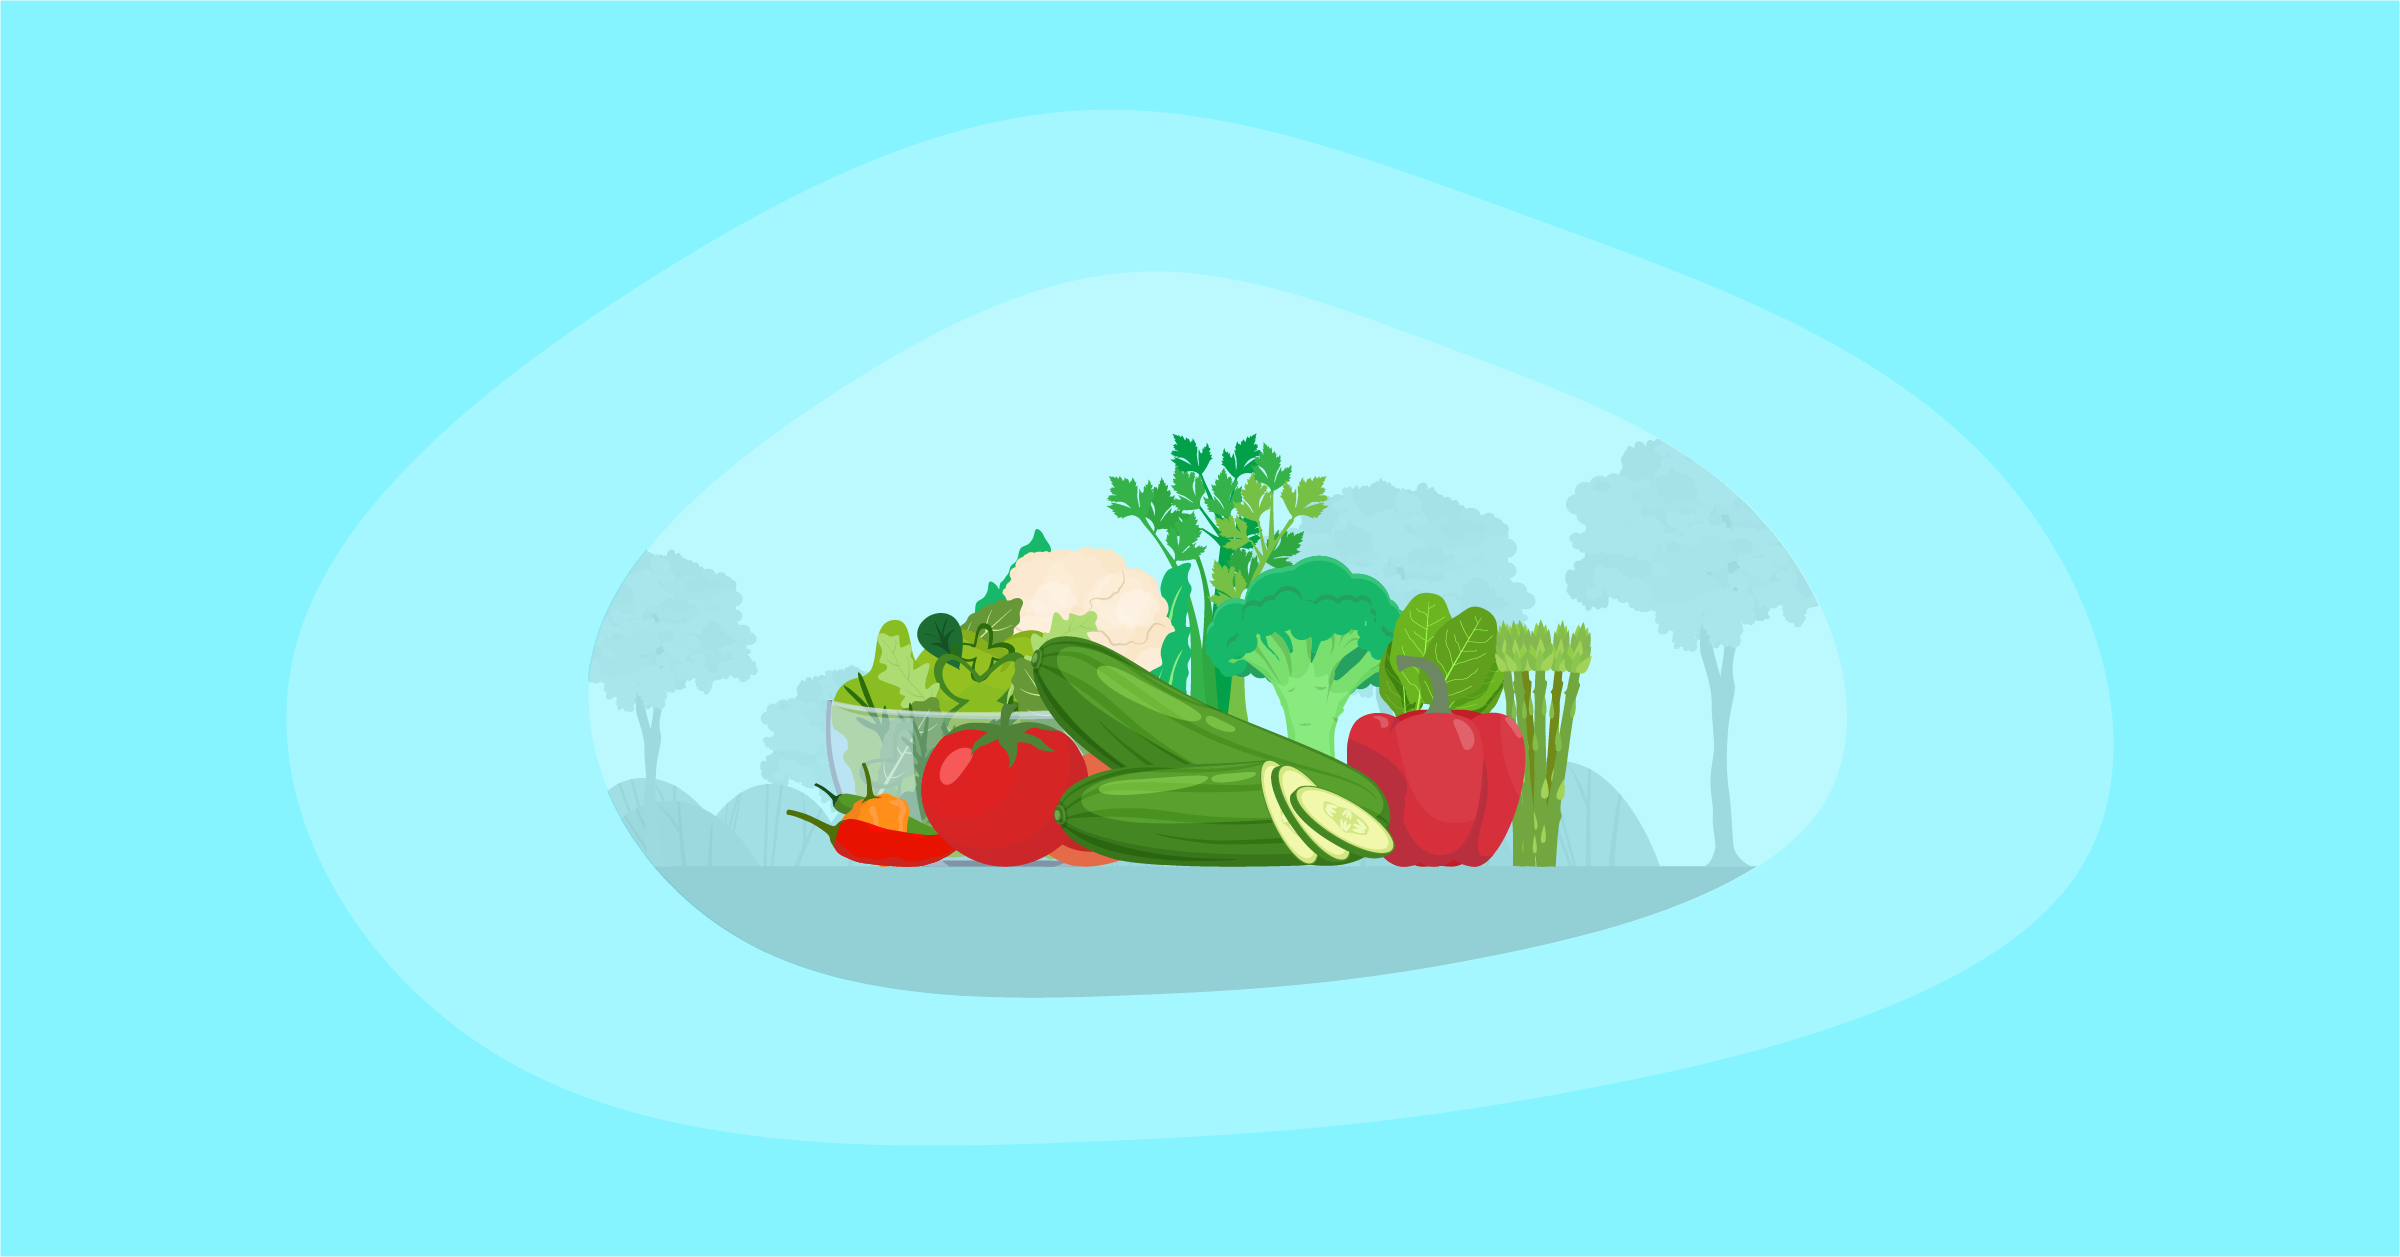 Illustration of vegetables with the highest carbon footprint